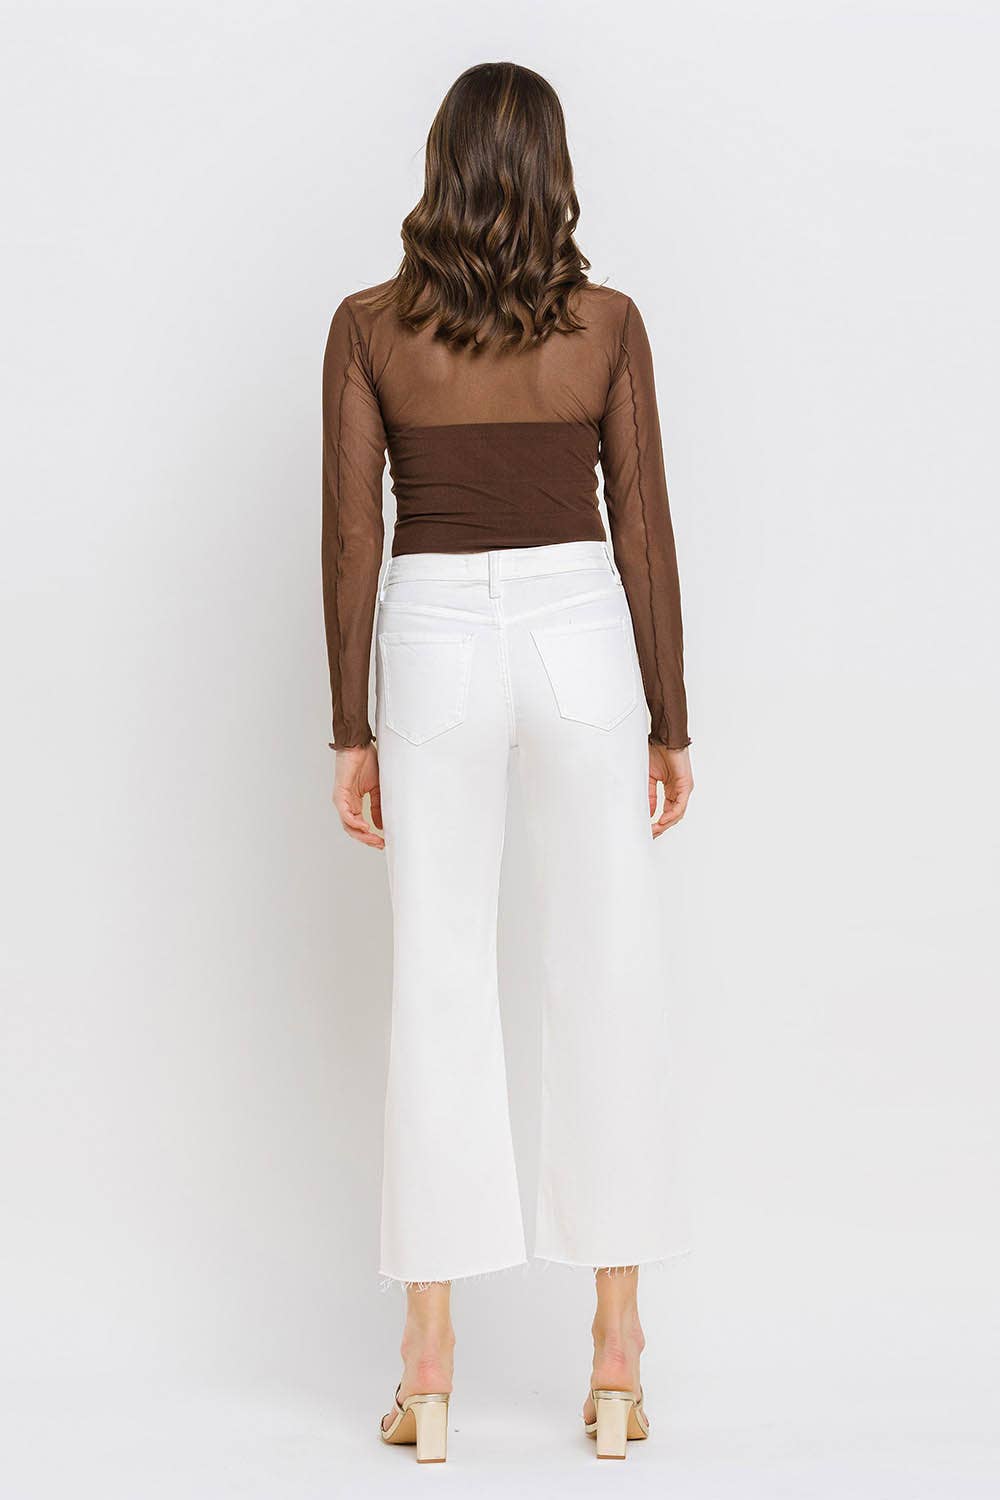 VERVET by FLYING MONKEY - HIGH RISE CROP WIDE LEG JEANS T5894WH: OPTIC WHITE / 30